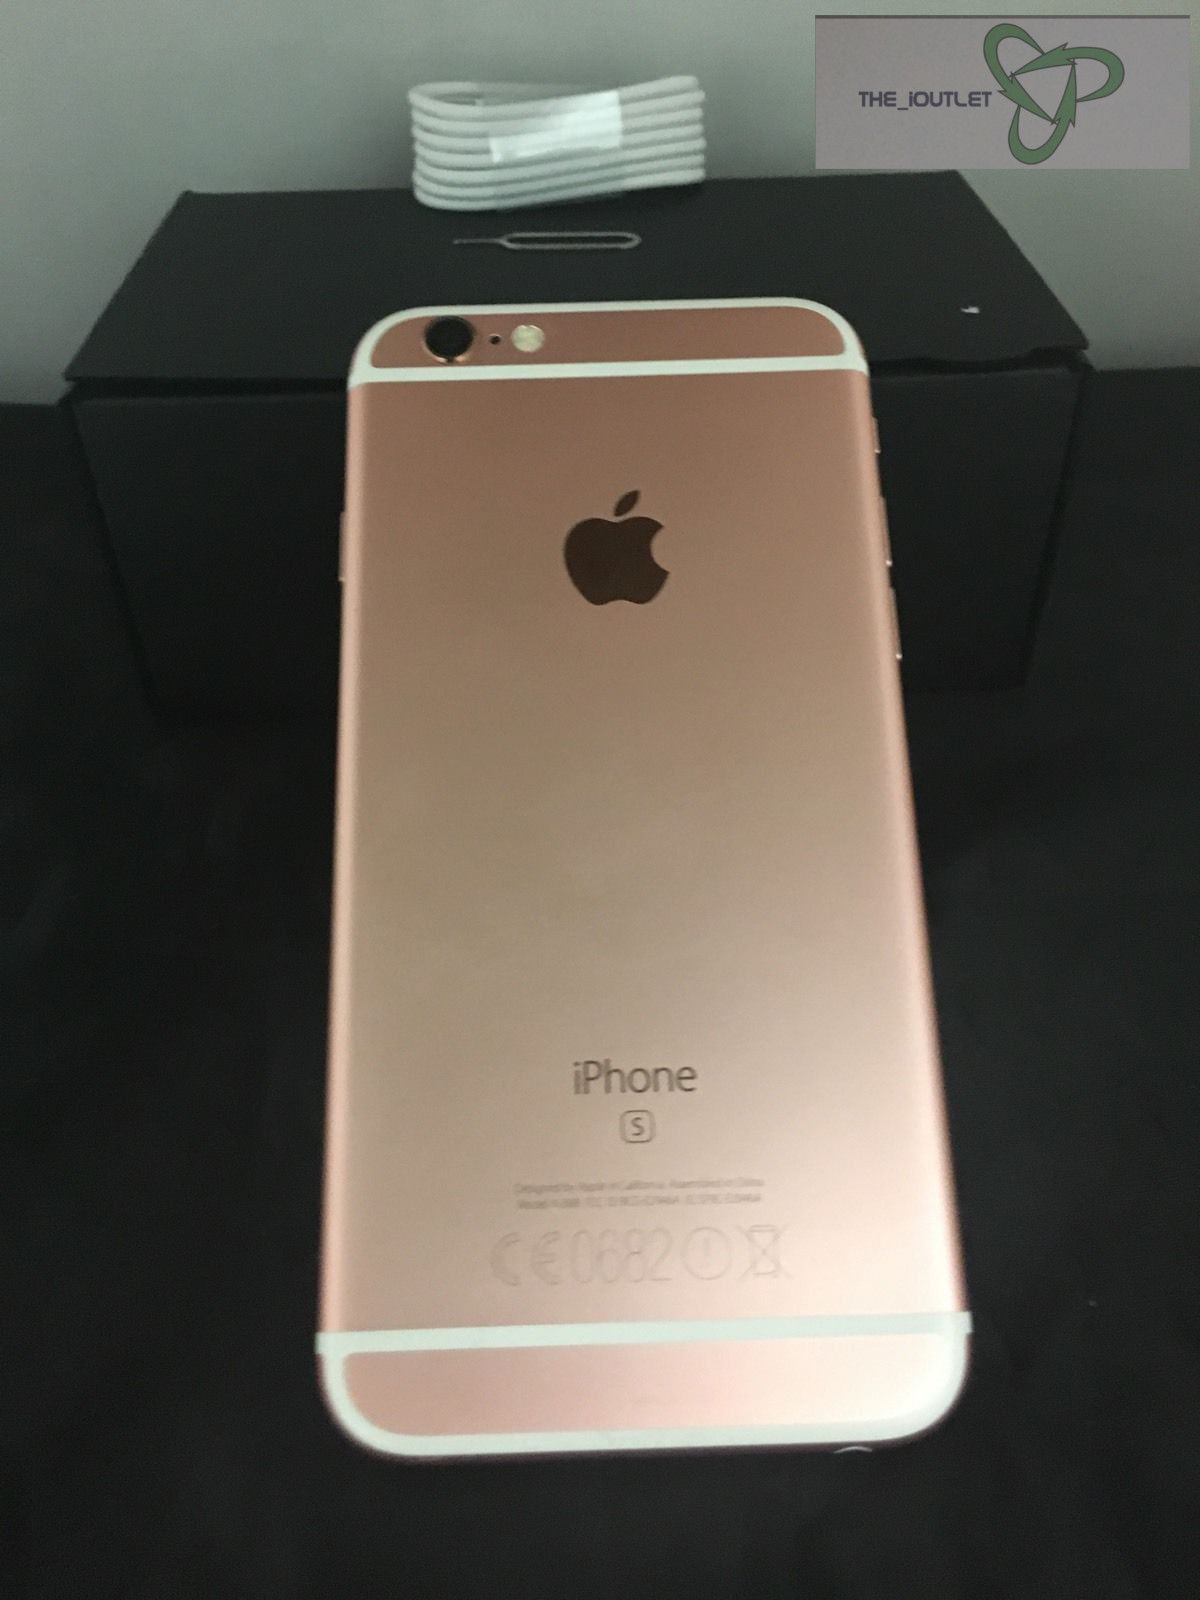 Apple iPhone 6s - 16GB - Rose Gold (Unlocked) - Grade A EXCELLENT CONDITION